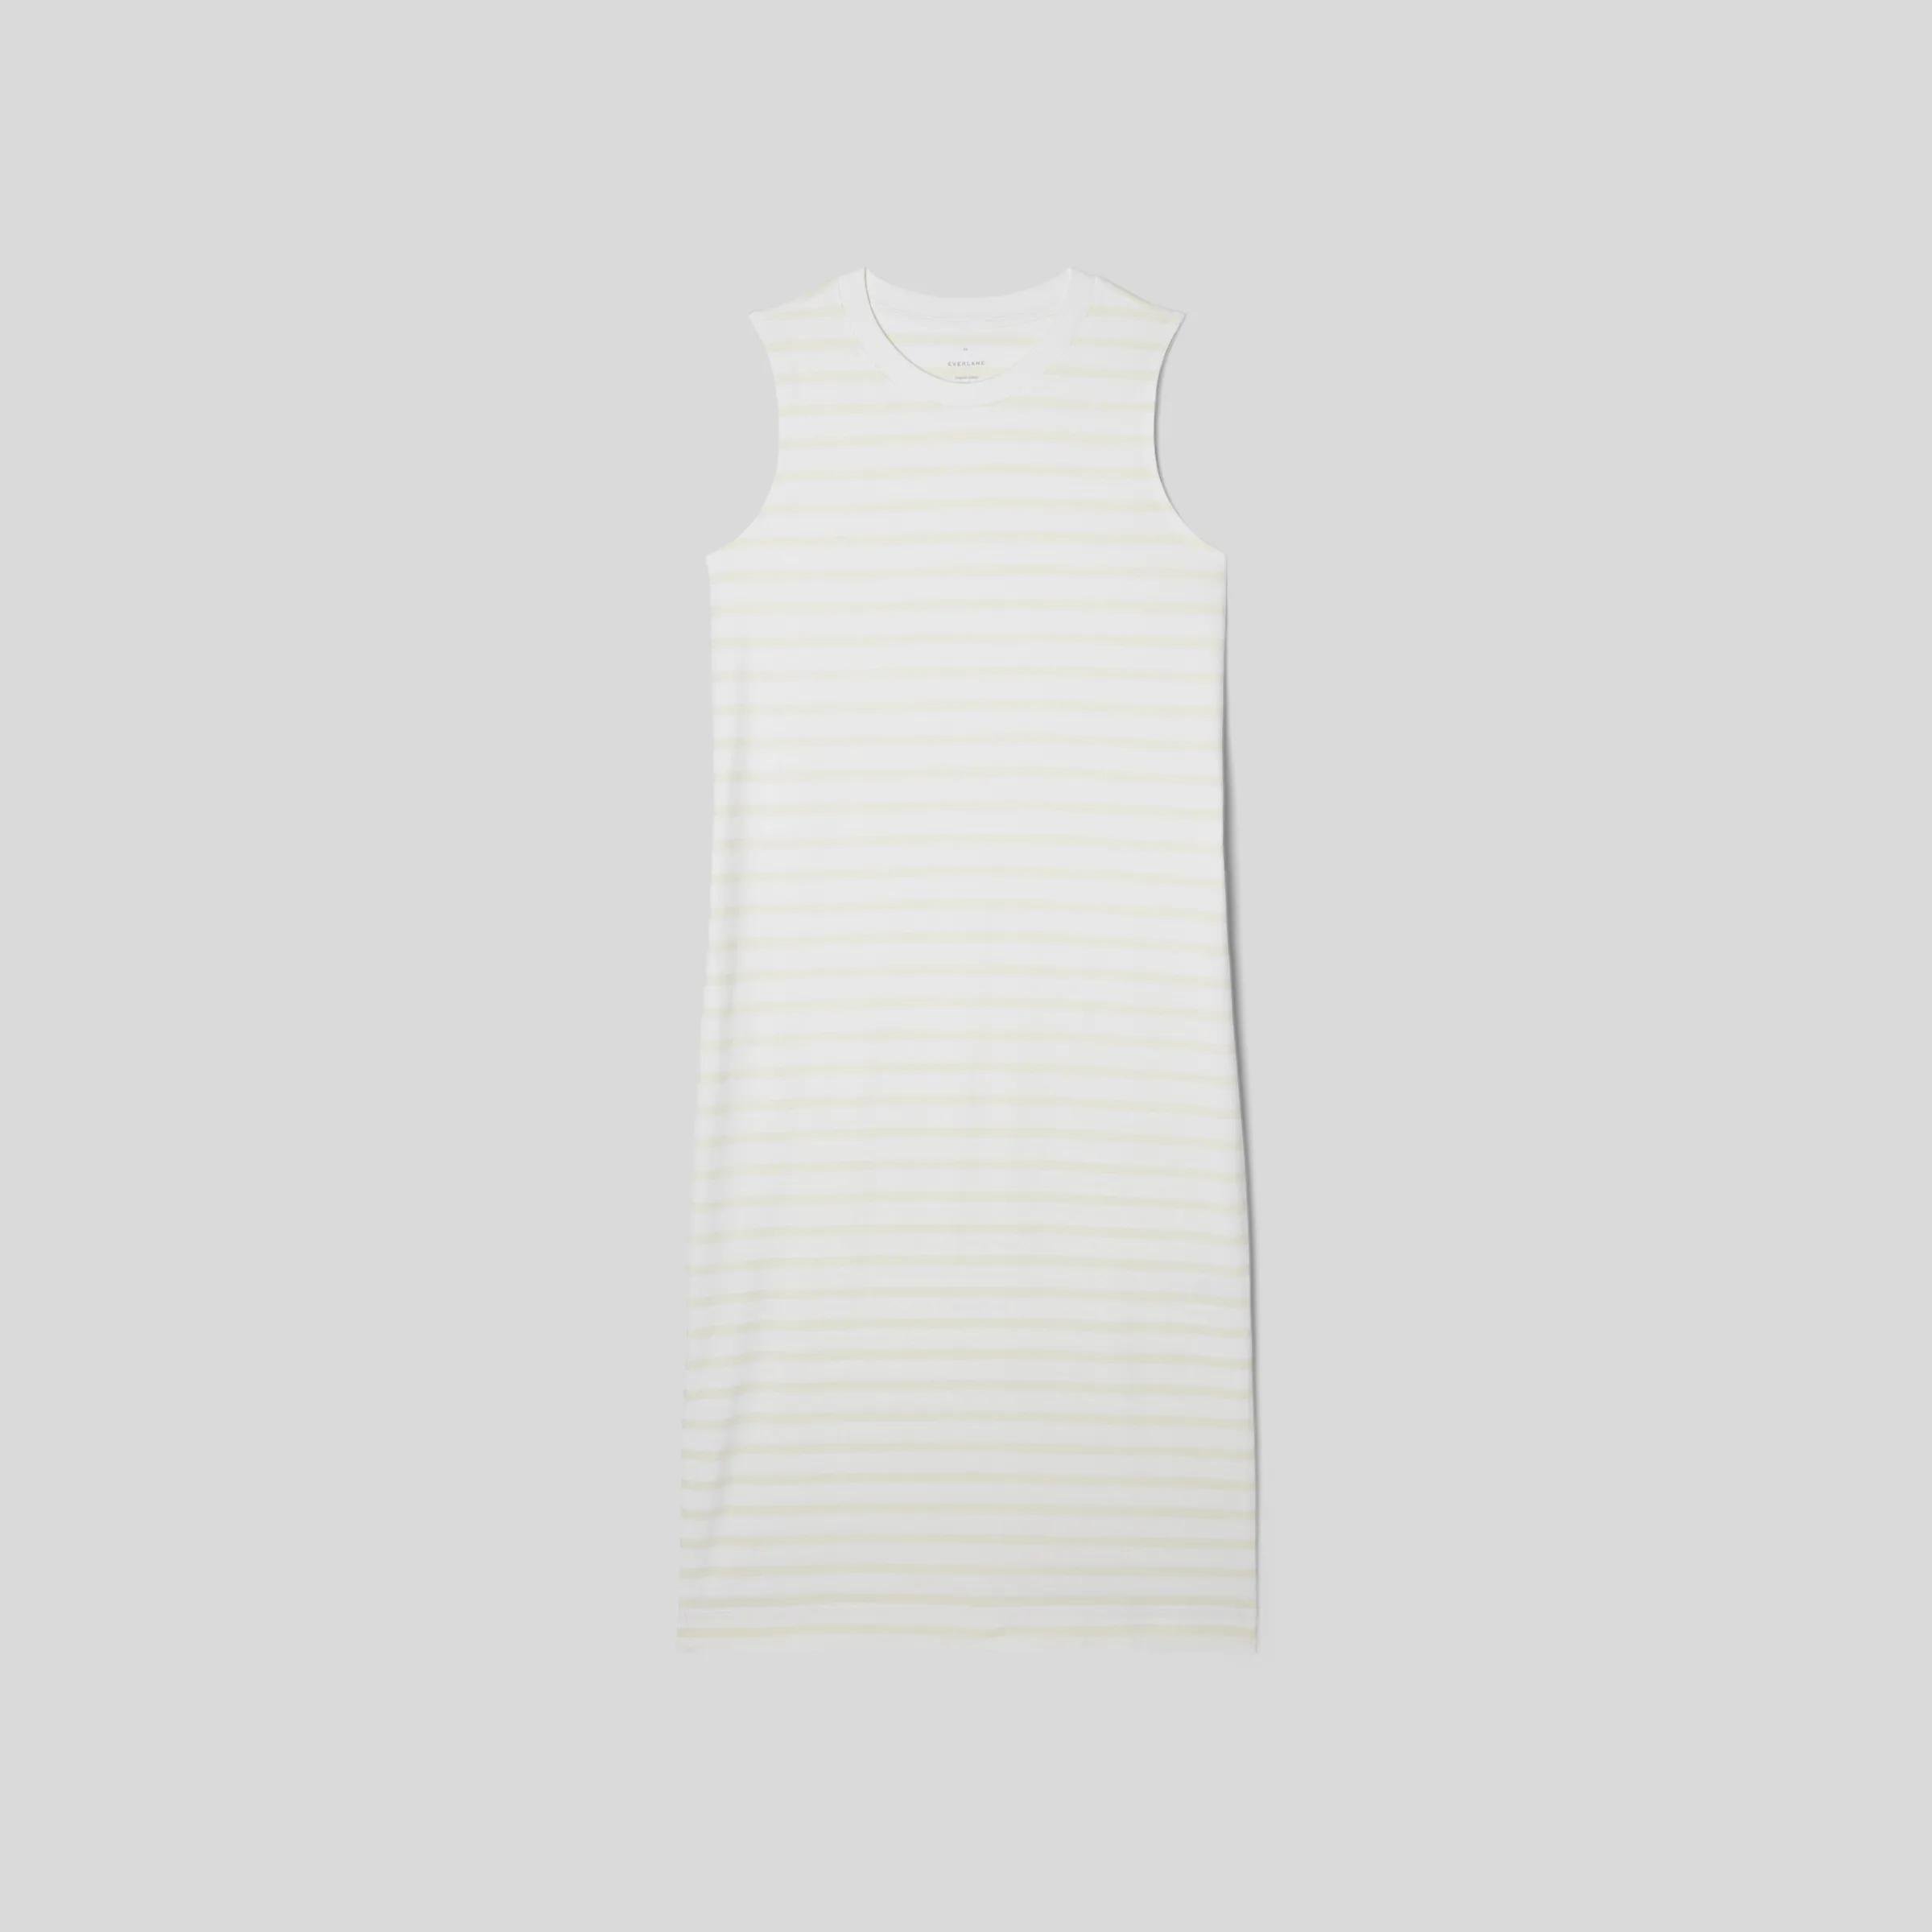 The Organic Cotton Weekend Tank Dress by EVERLANE